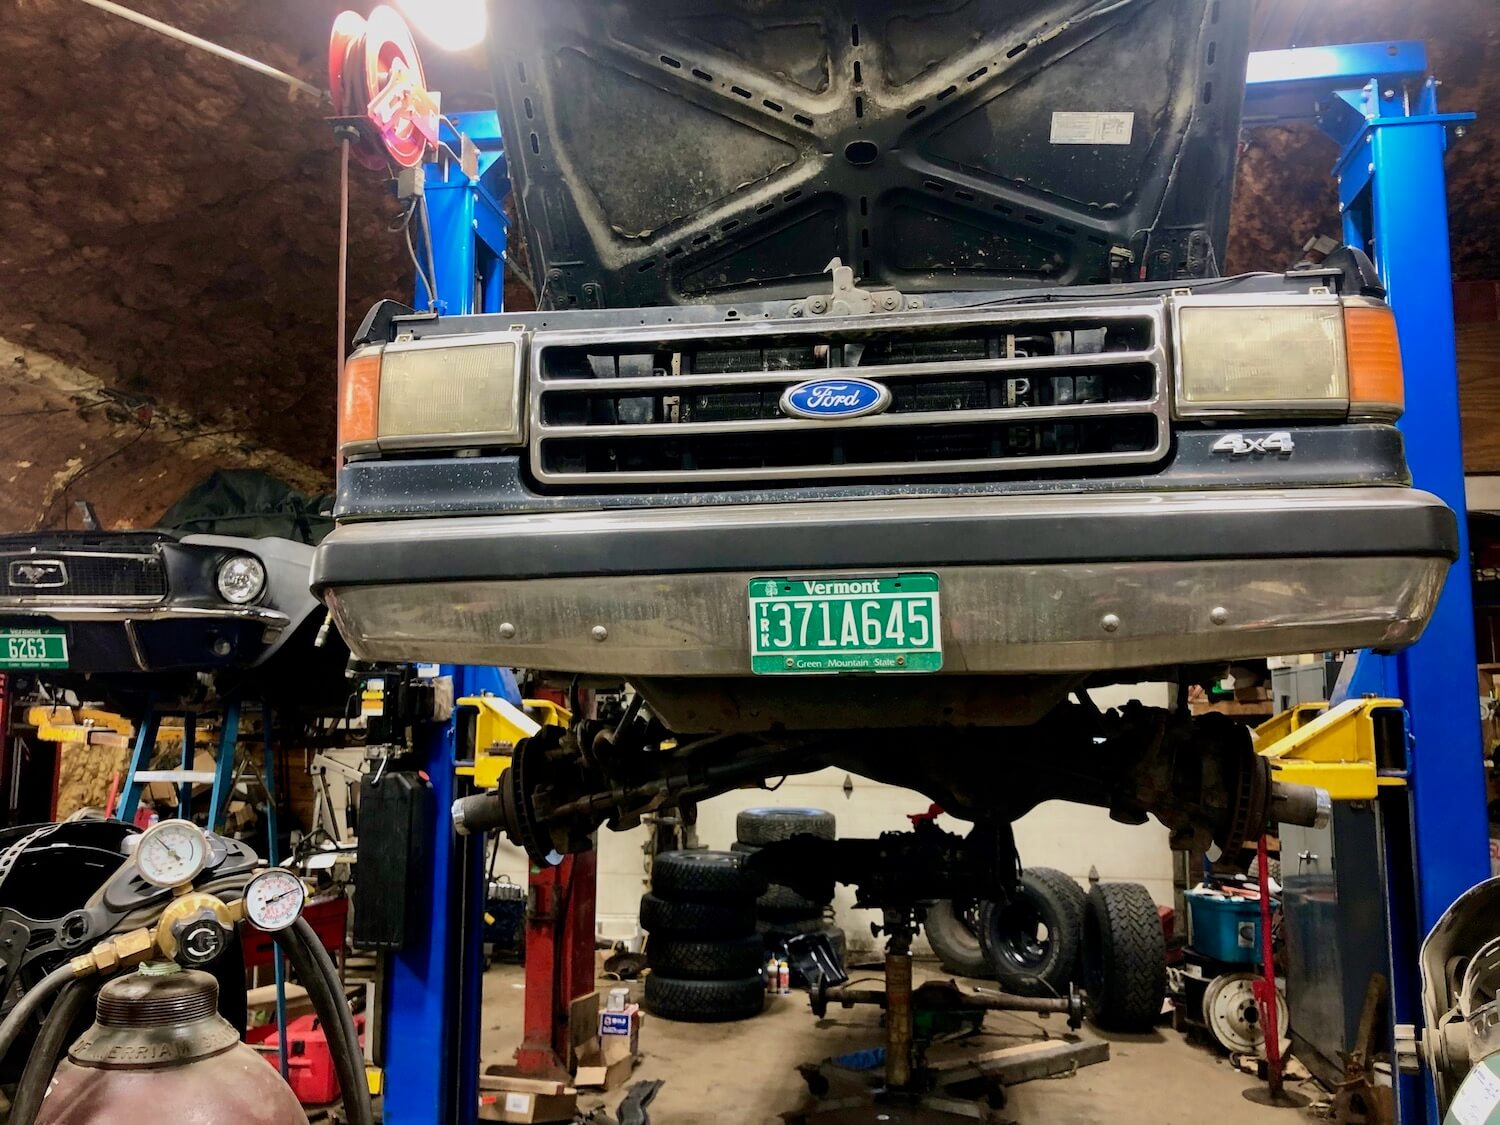 A 1988 Ford F-150 sitting on a lift in a garage.